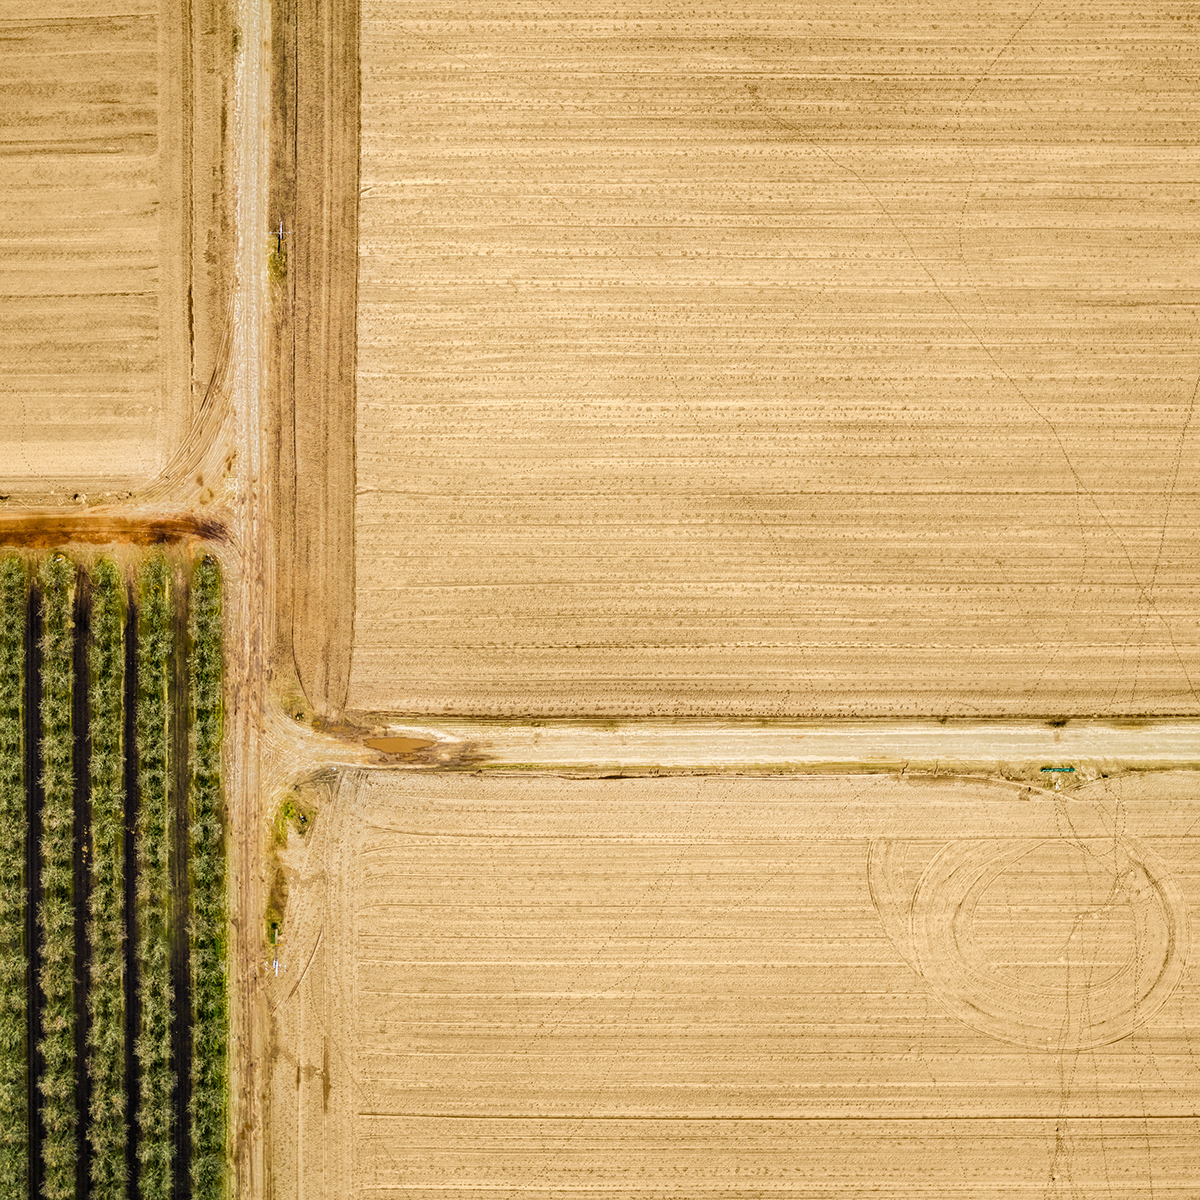 agriculture farm Aerial Photography art land patterns Landscape Beautiful California